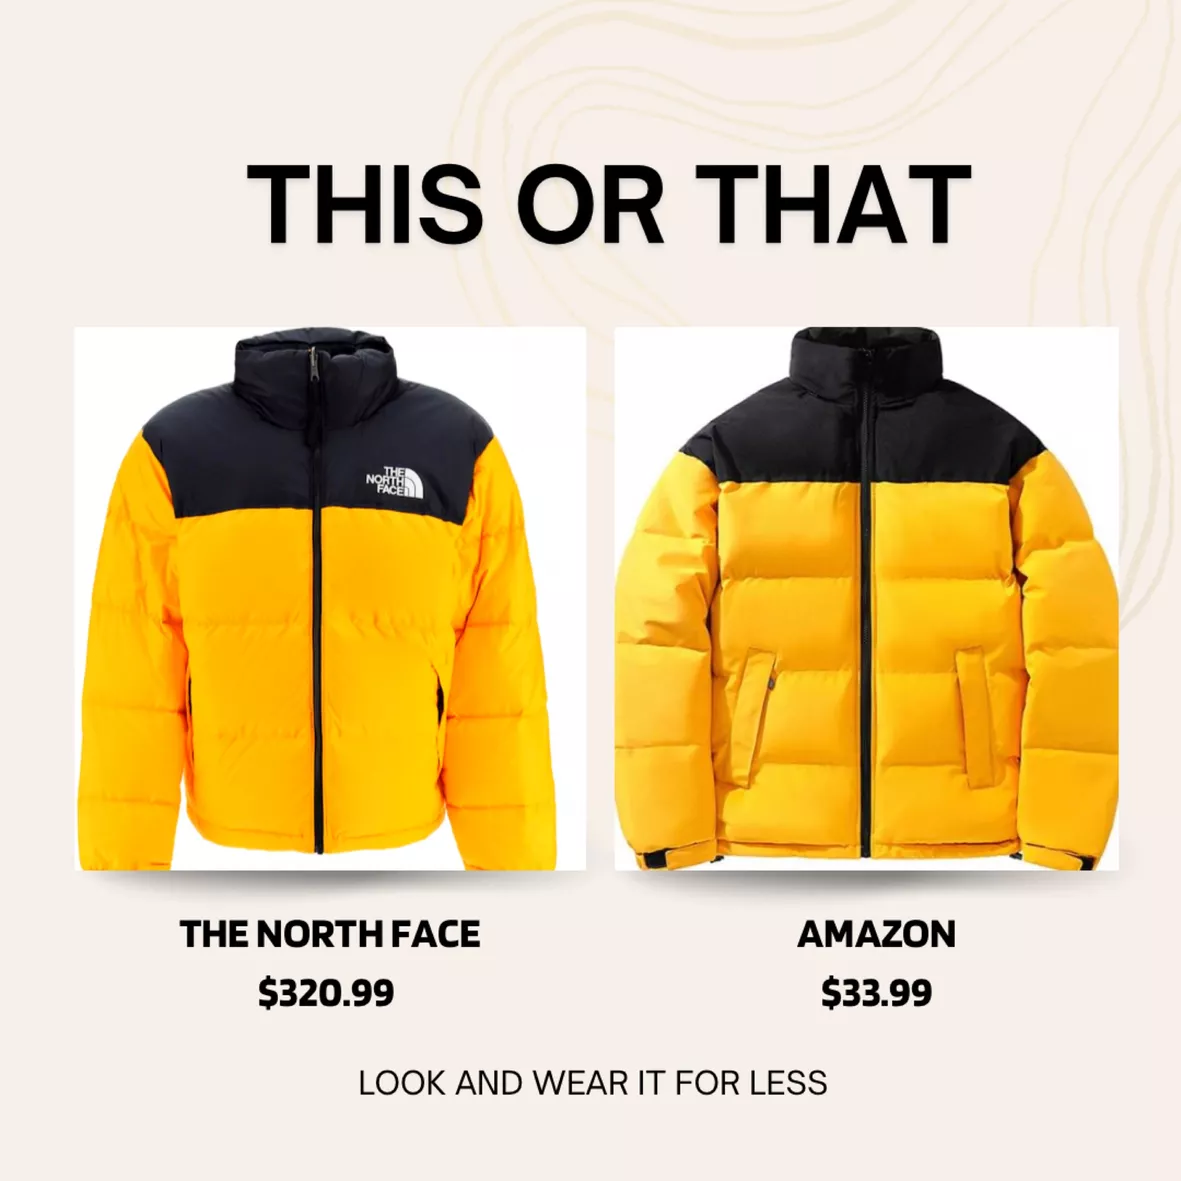 The North Face Puffer Jacket Outfit Men  North face jacket outfit, North  face jacket mens, North face outfits